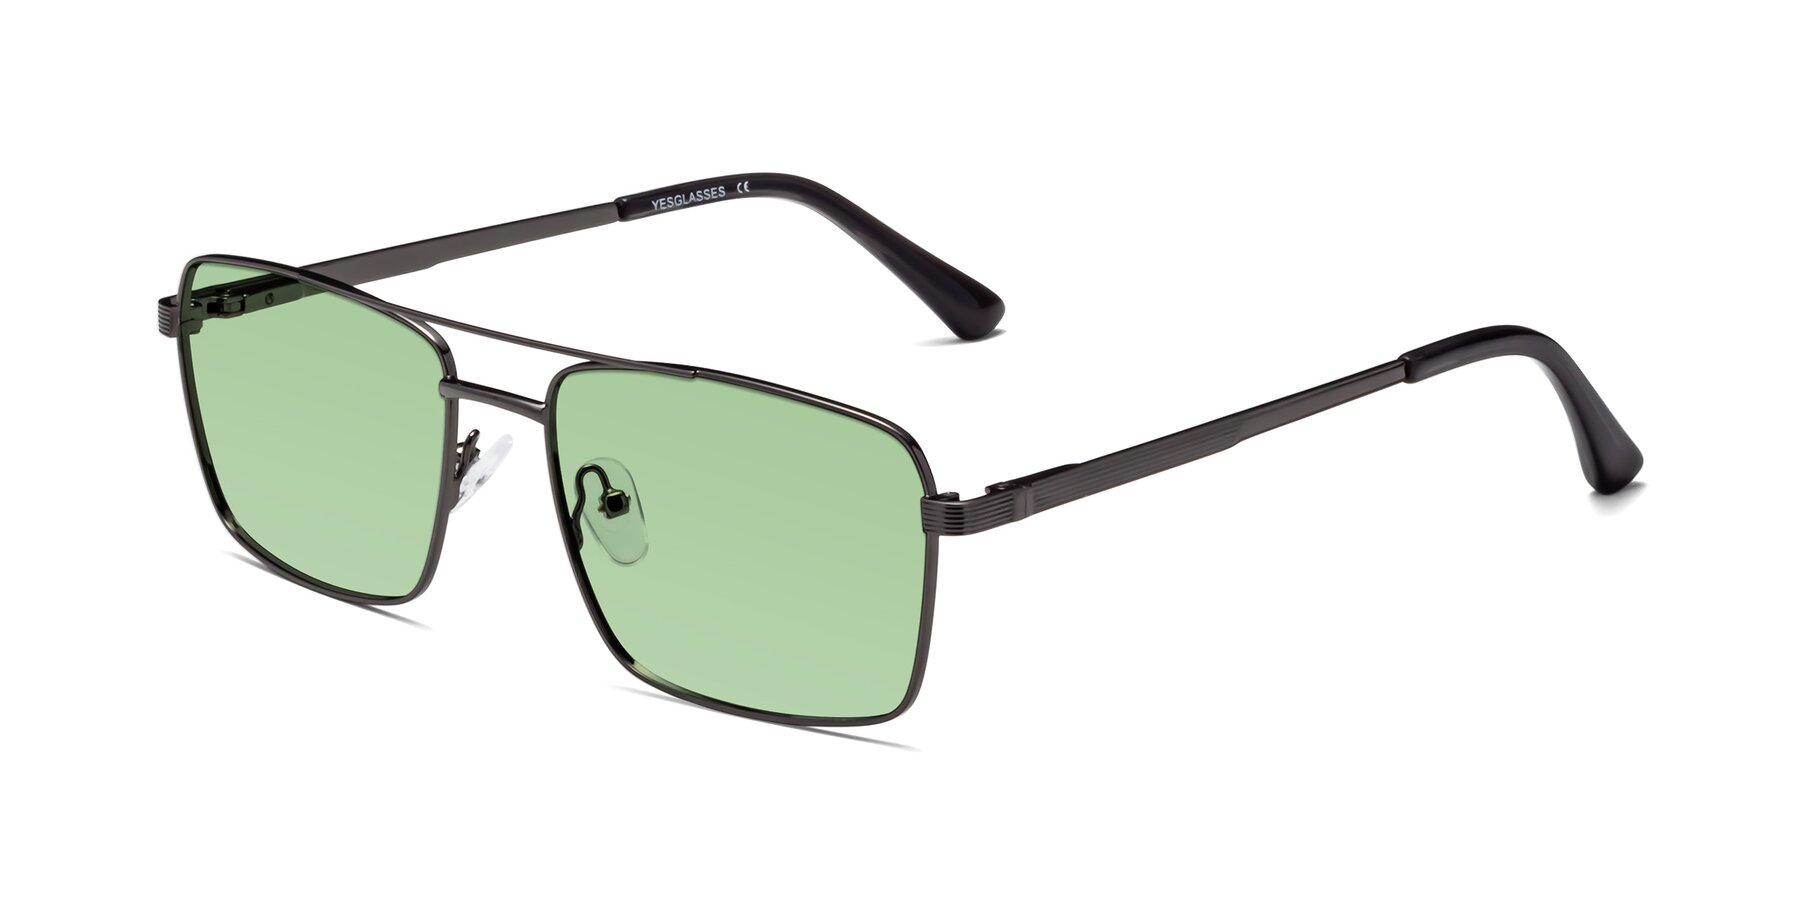 Angle of Beckum in Gunmetal with Medium Green Tinted Lenses